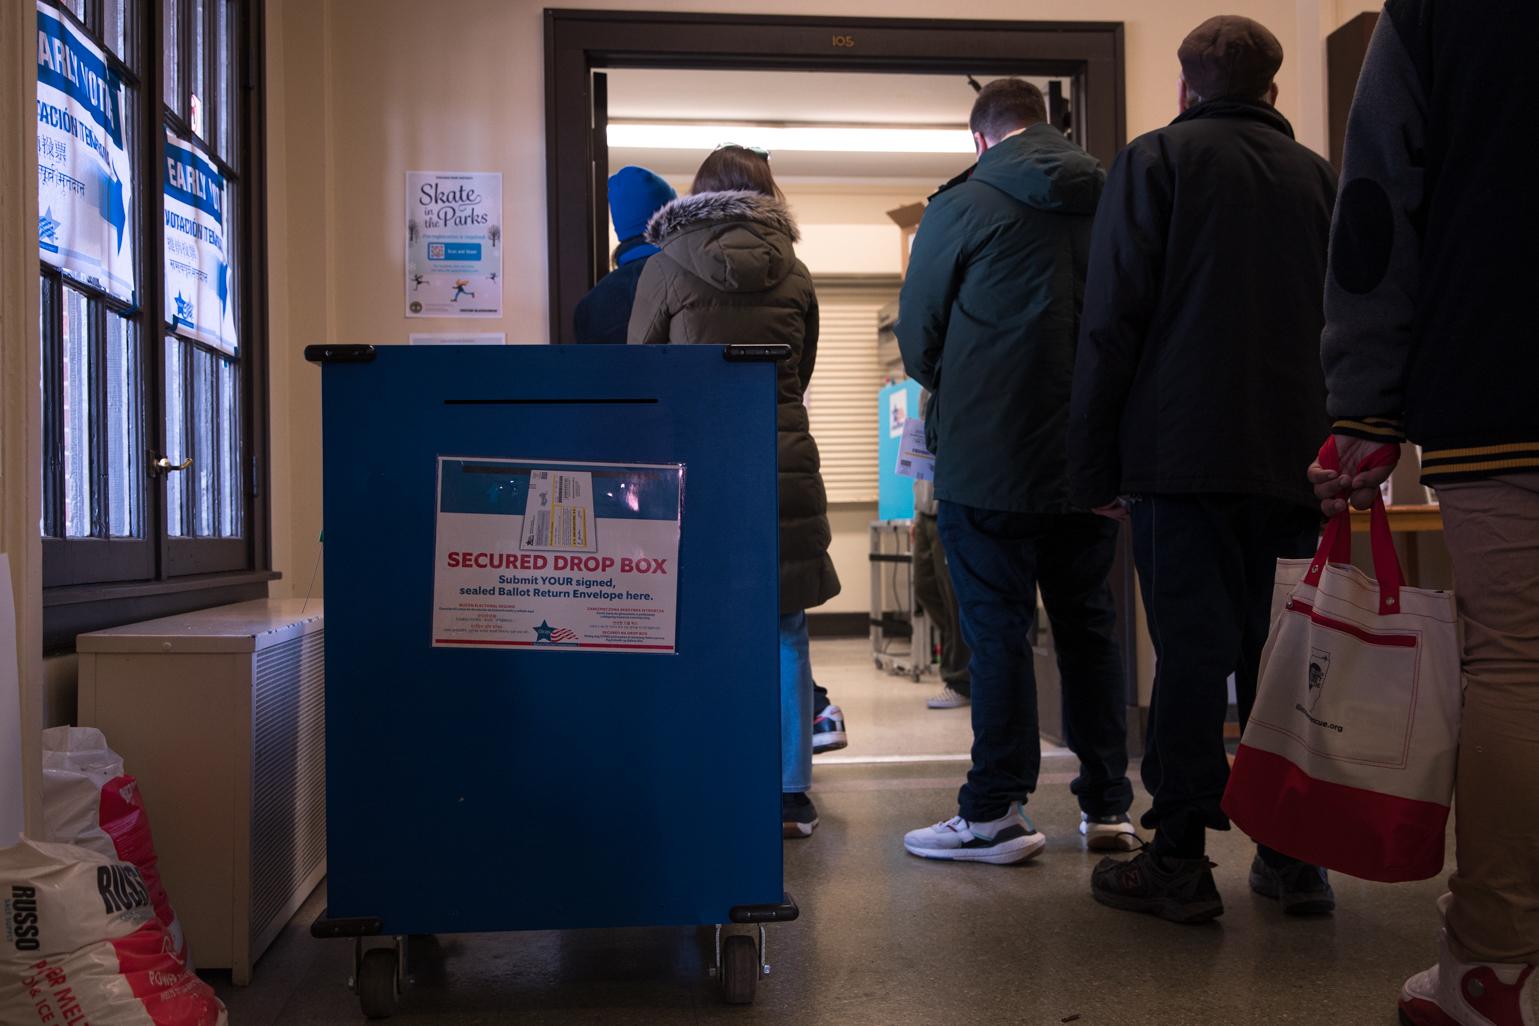 Registered voters in the 31st Ward and first-time voters from Kelvyn Park High School line up outside the Kilbourn Park polling station in anticipation to cast their ballots on Feb. 21, 2023. (Michael Izquierdo / WTTW News)